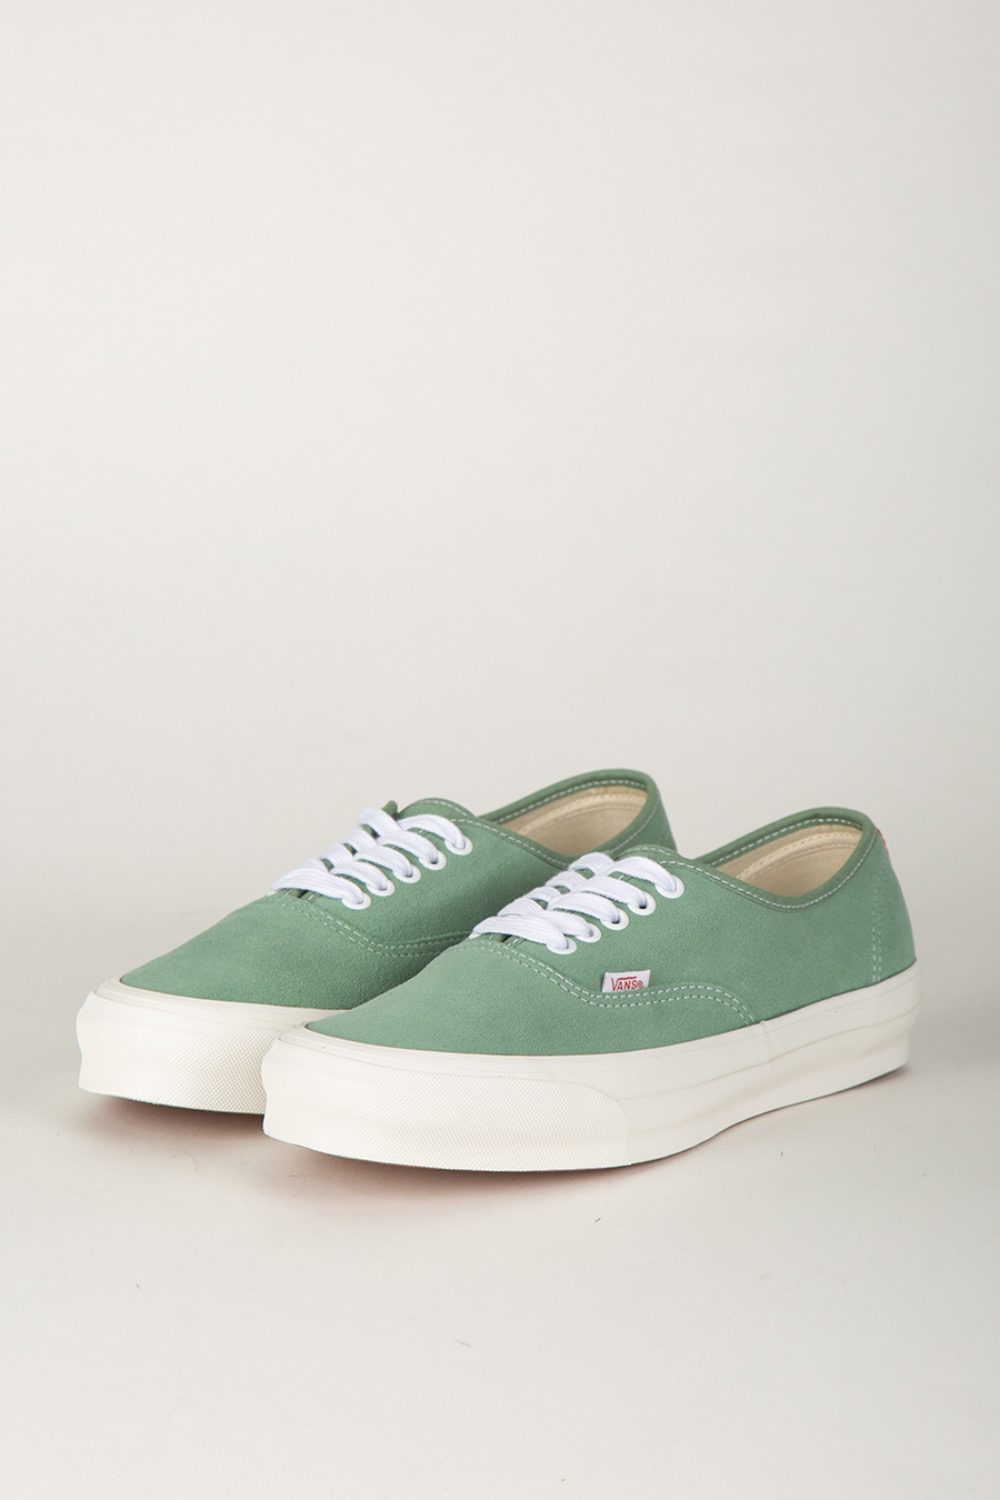 OG AUTHENTIC LX SUEDE LODEN